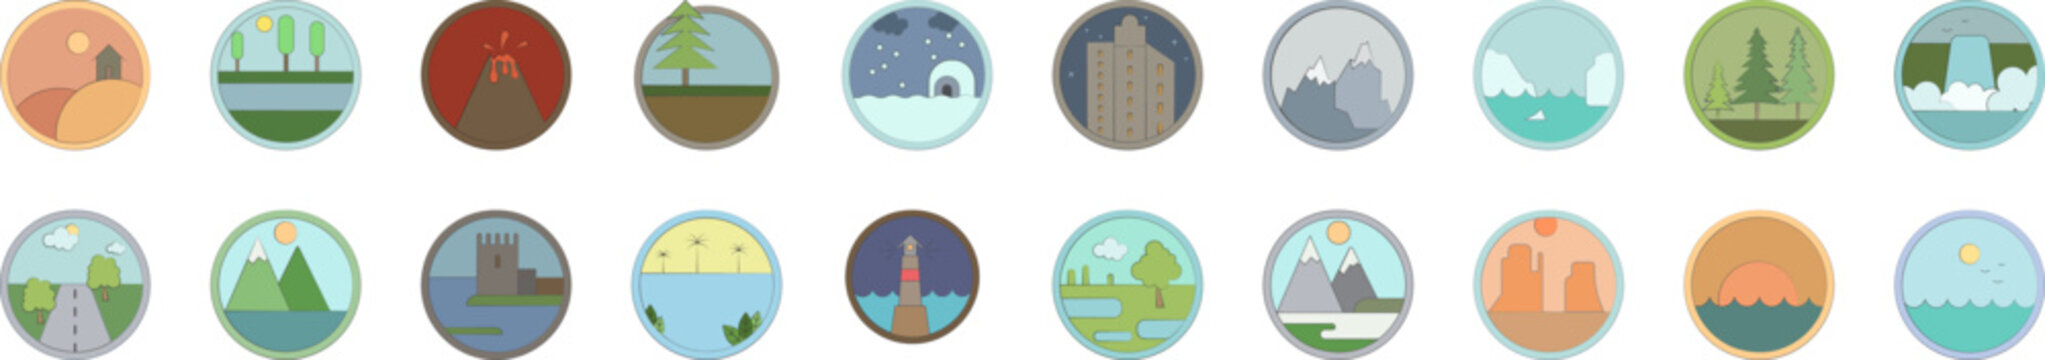 Landscapes icon collections vector design